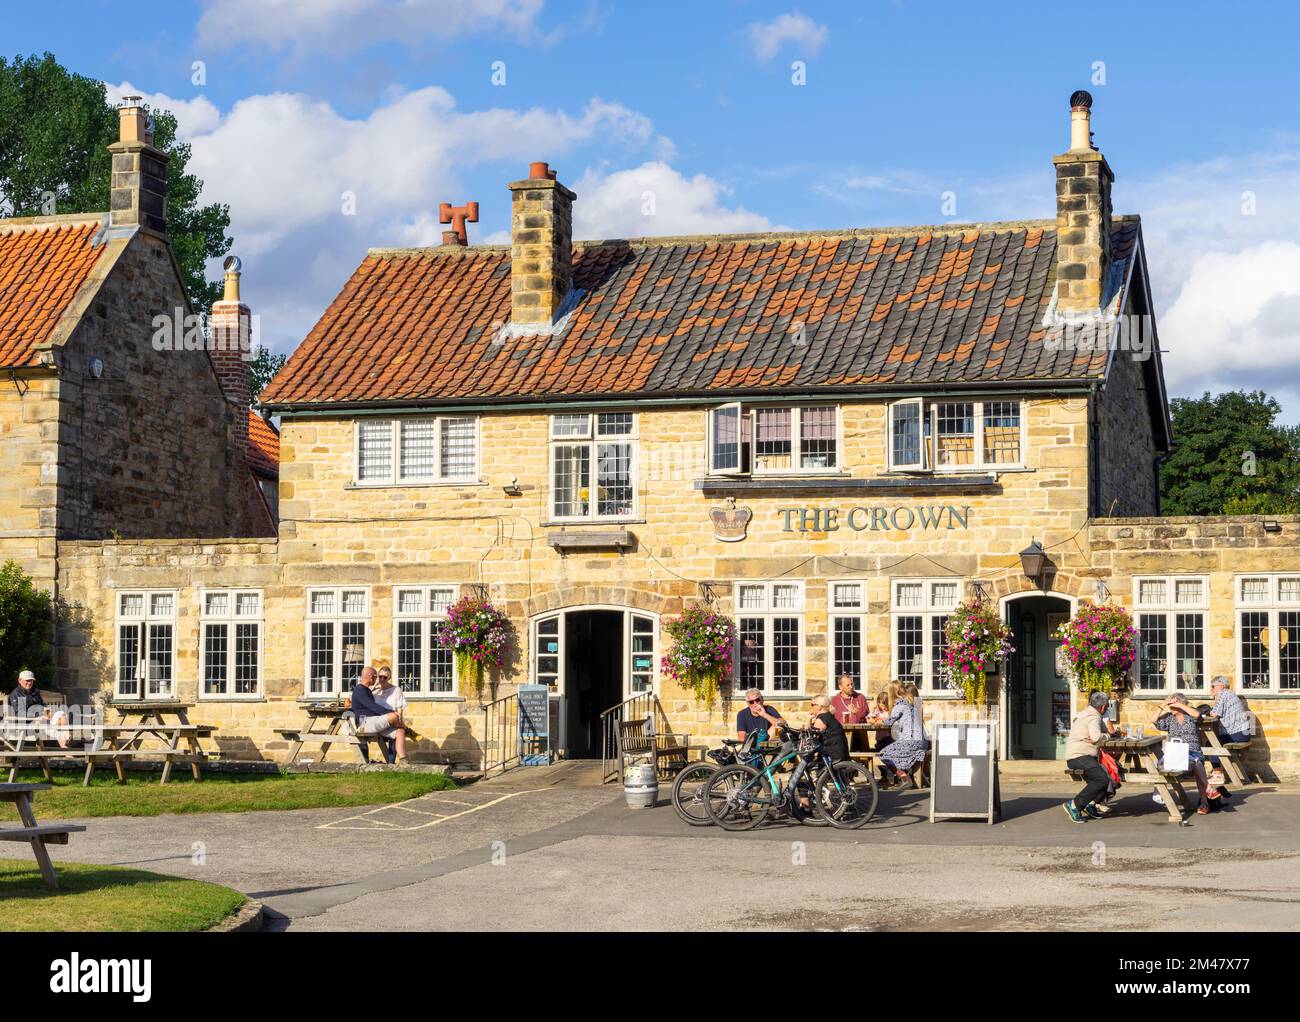 Hutton le Hole North Yorkshire People sat drinking outside The Crown pub on the green in Hutton le Hole Yorkshire UK GB Europe Stock Photo